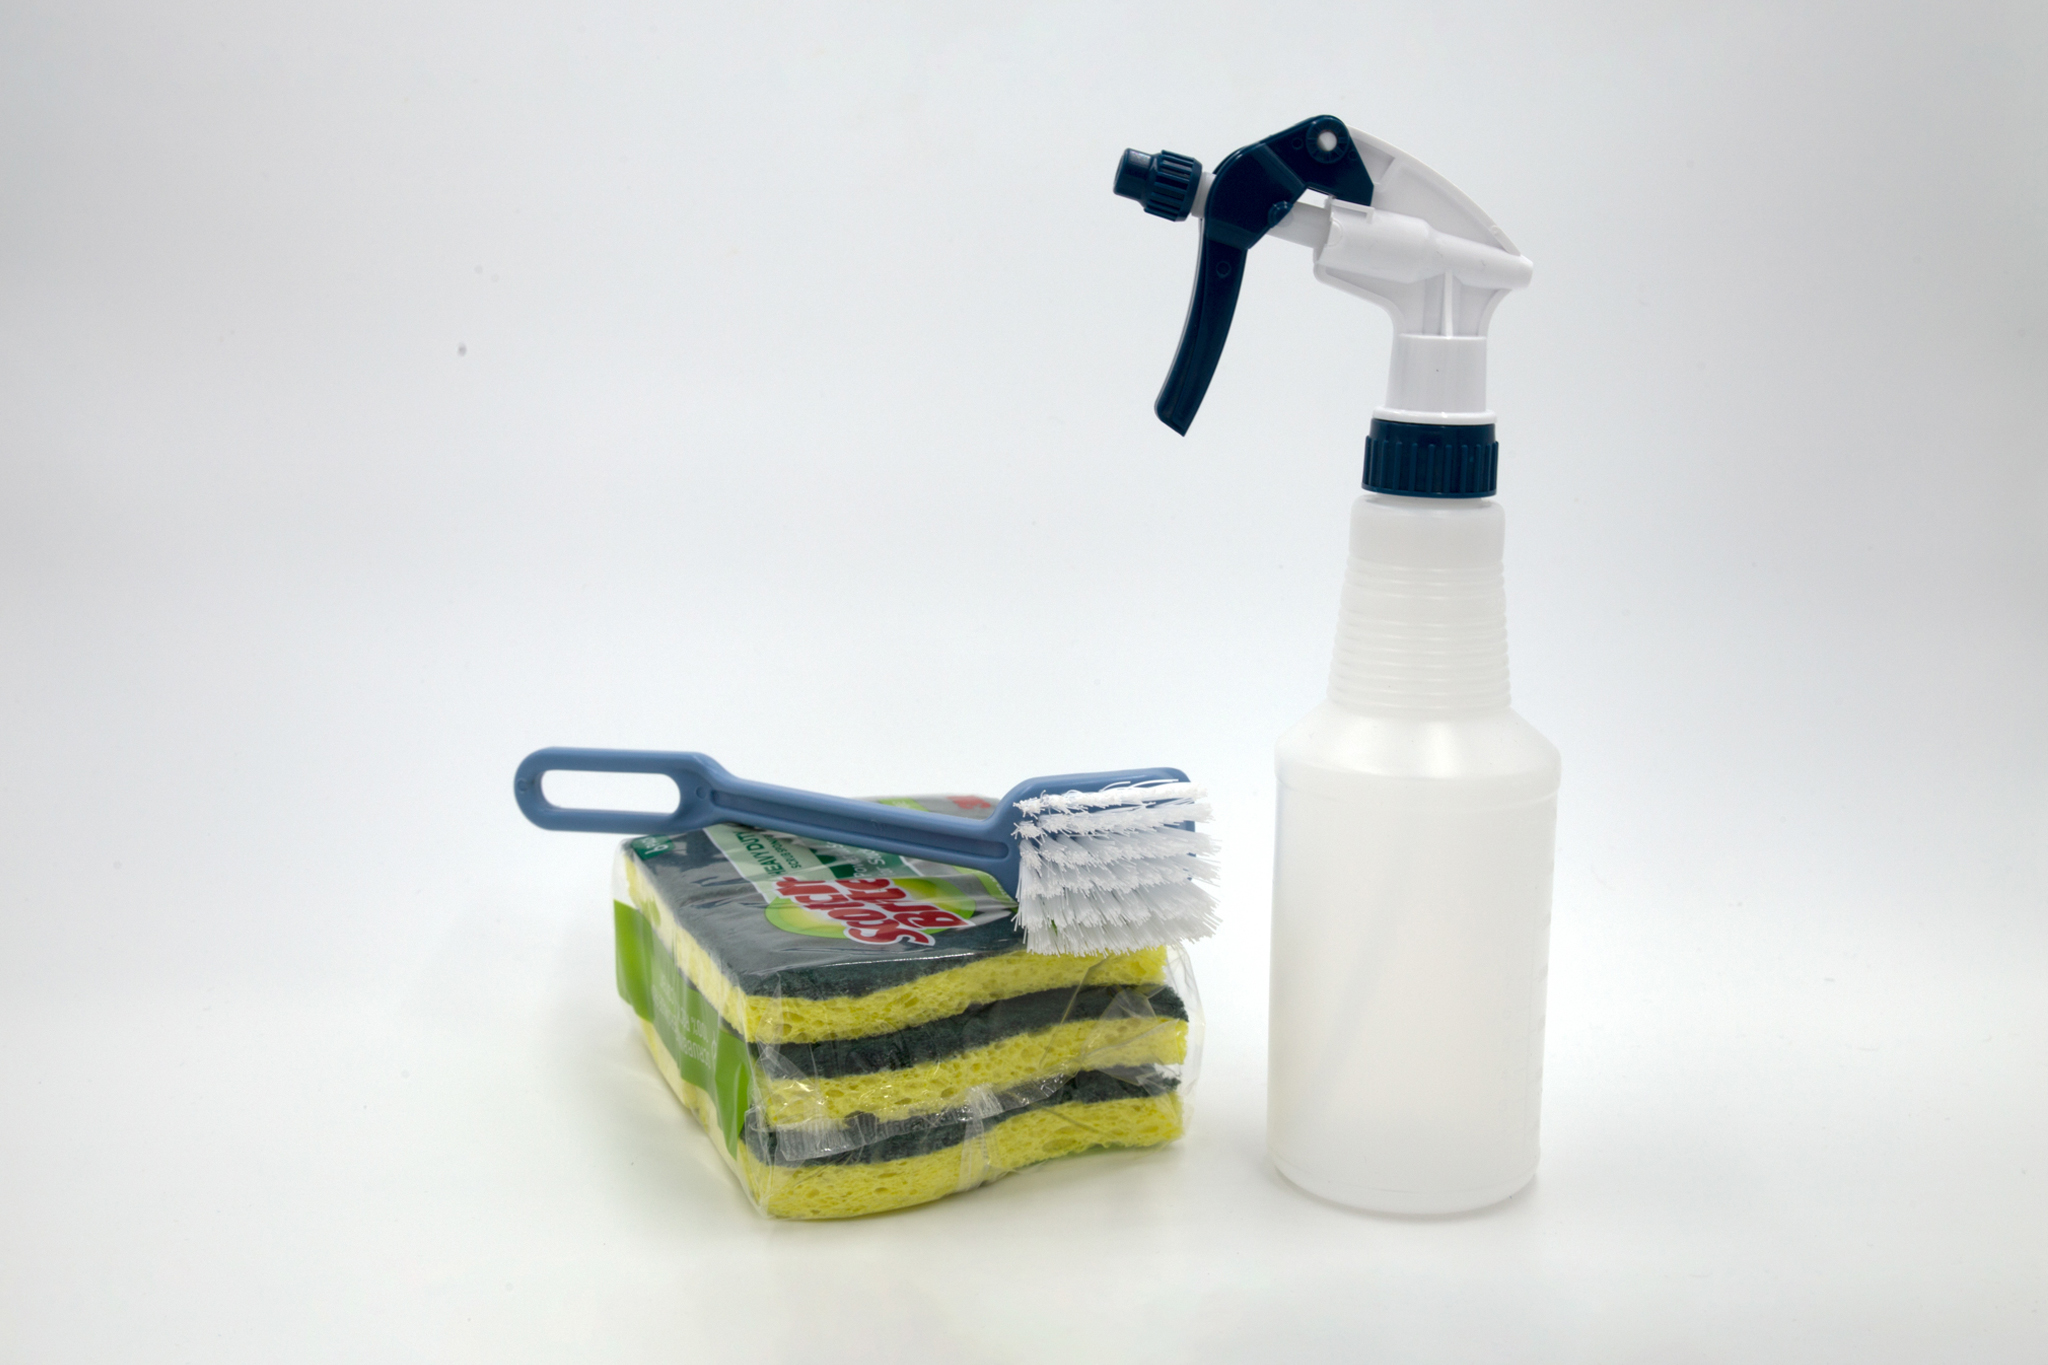 A sponge, spray bottle, and cleaning brush on a white background